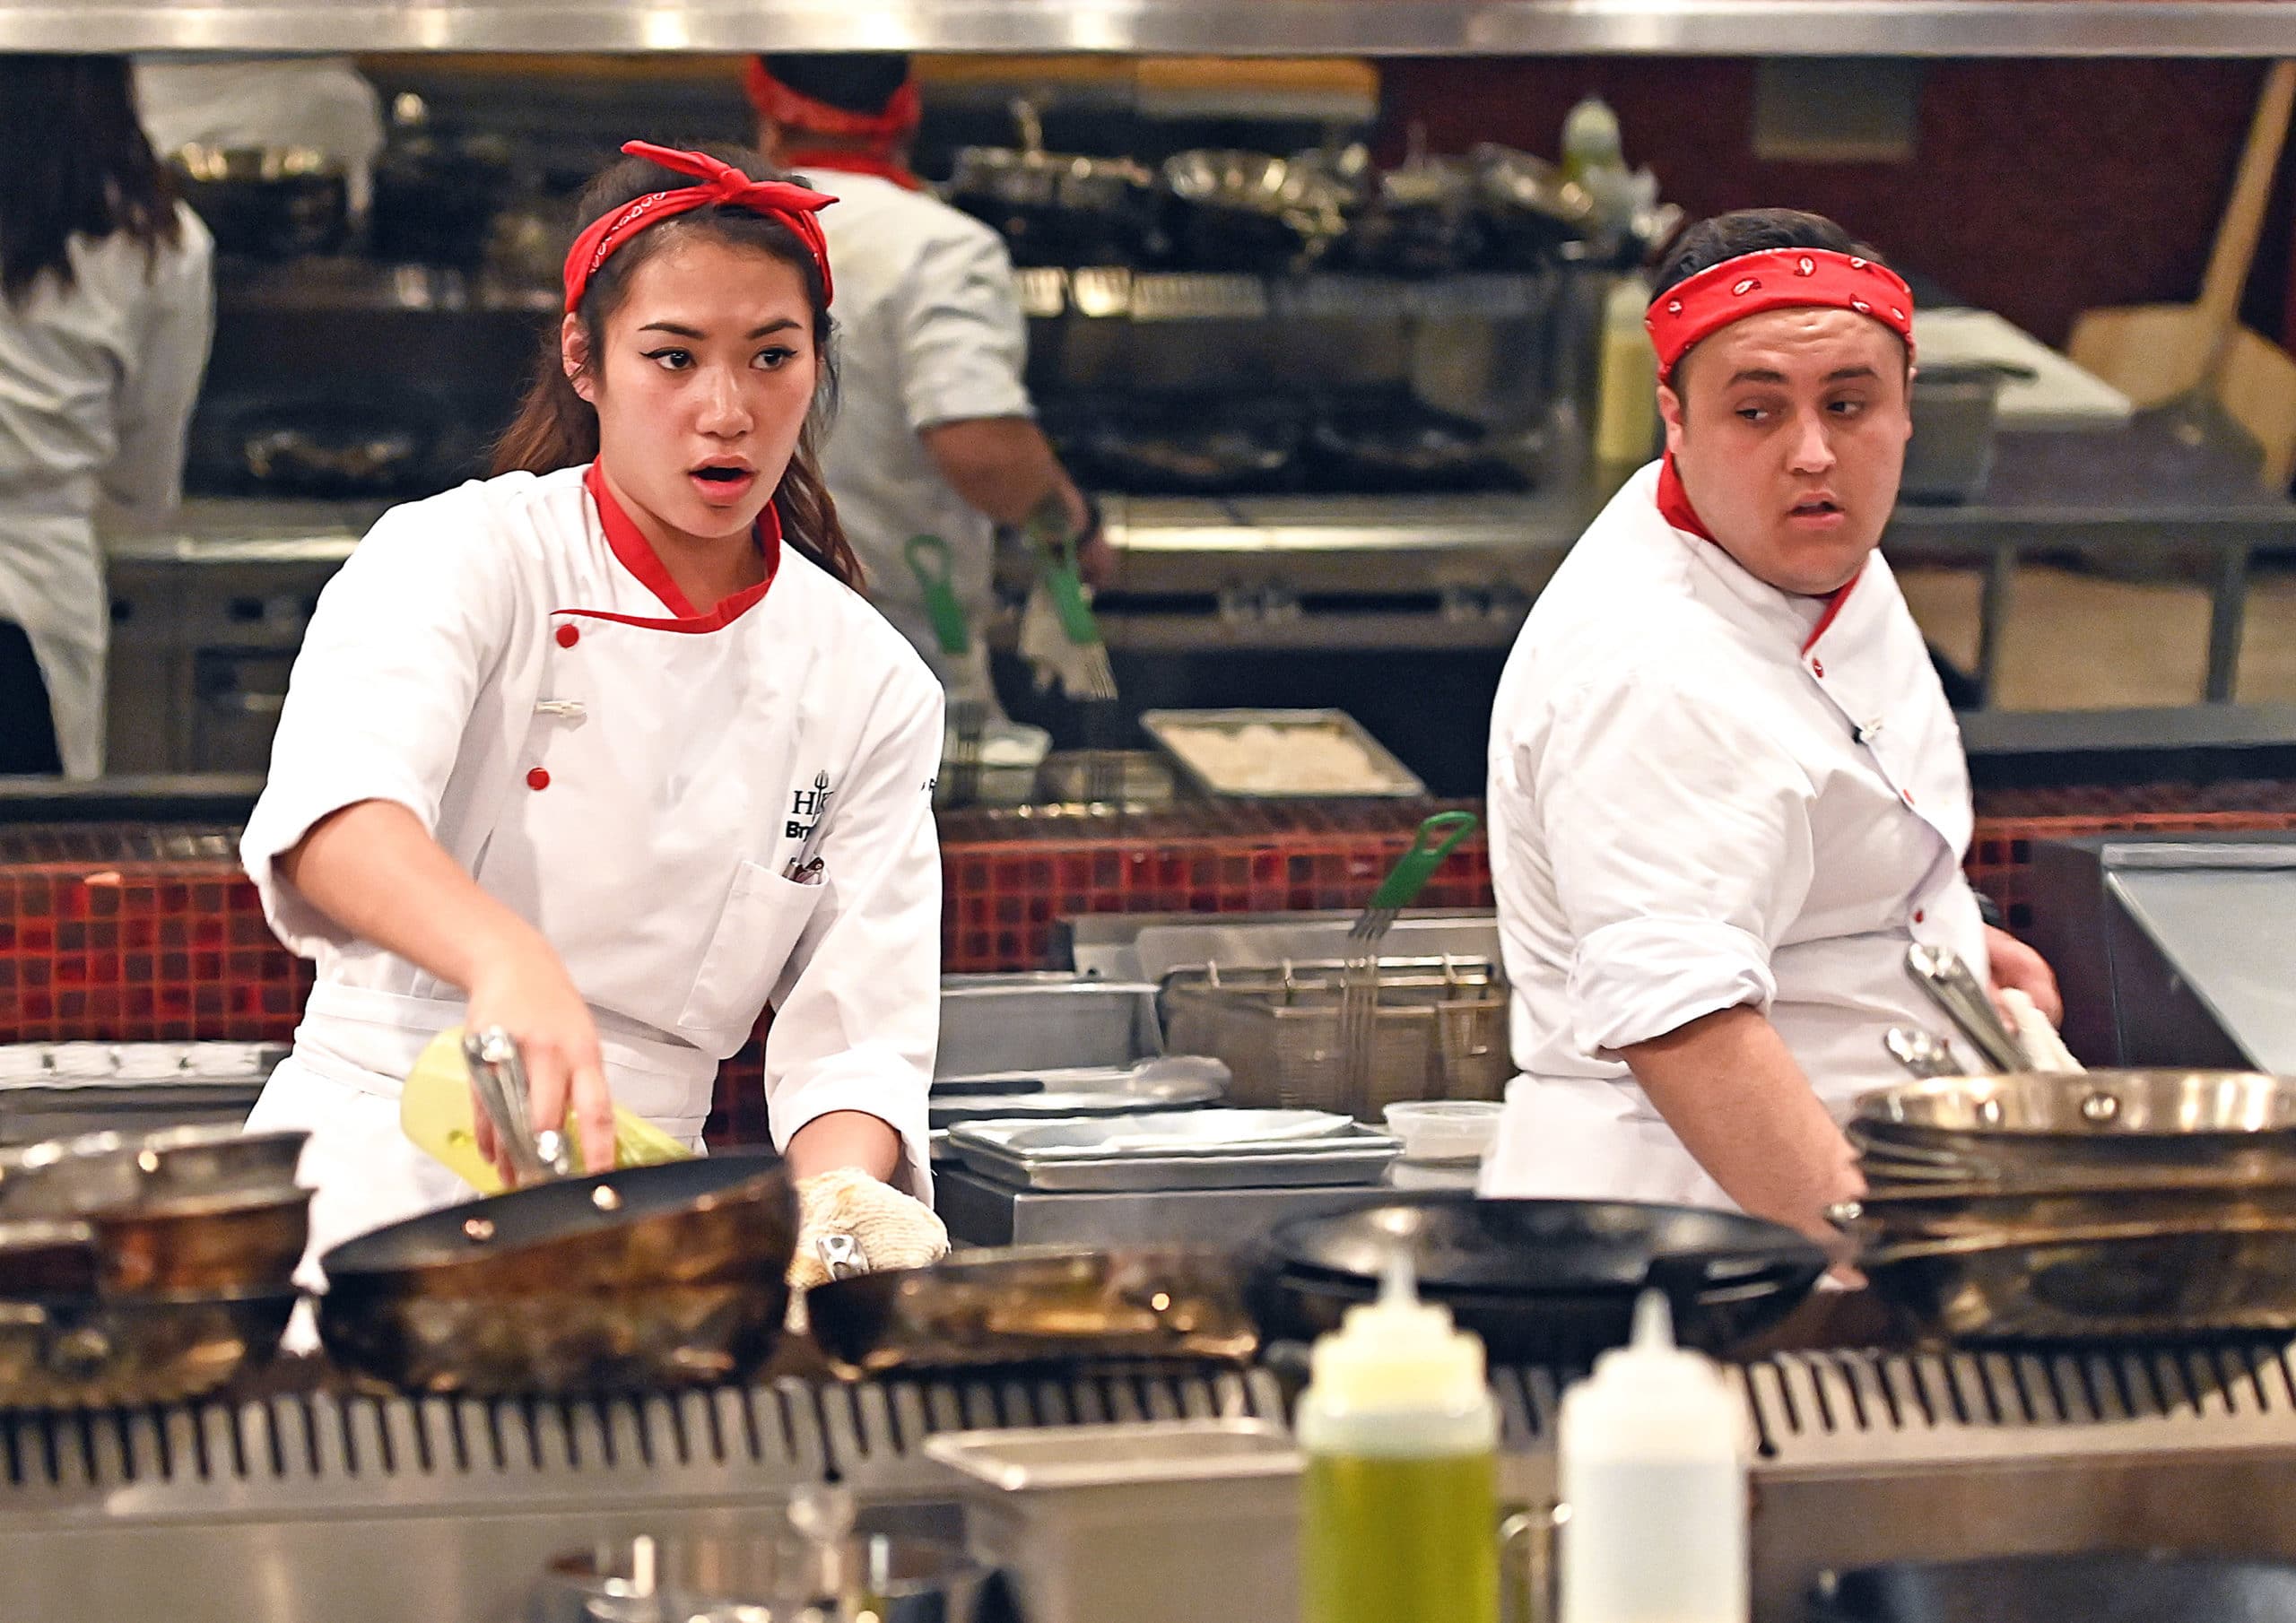 HELL'S KITCHEN: L-R: Contestants Brynn and Antonio in the “A Game Show From Hell” episode airing Aug 9 (8:00-9:01PM ET/PT) on FOX. CR: Scott Kirkland / FOX. © 2021 FOX MEDIA LLC.